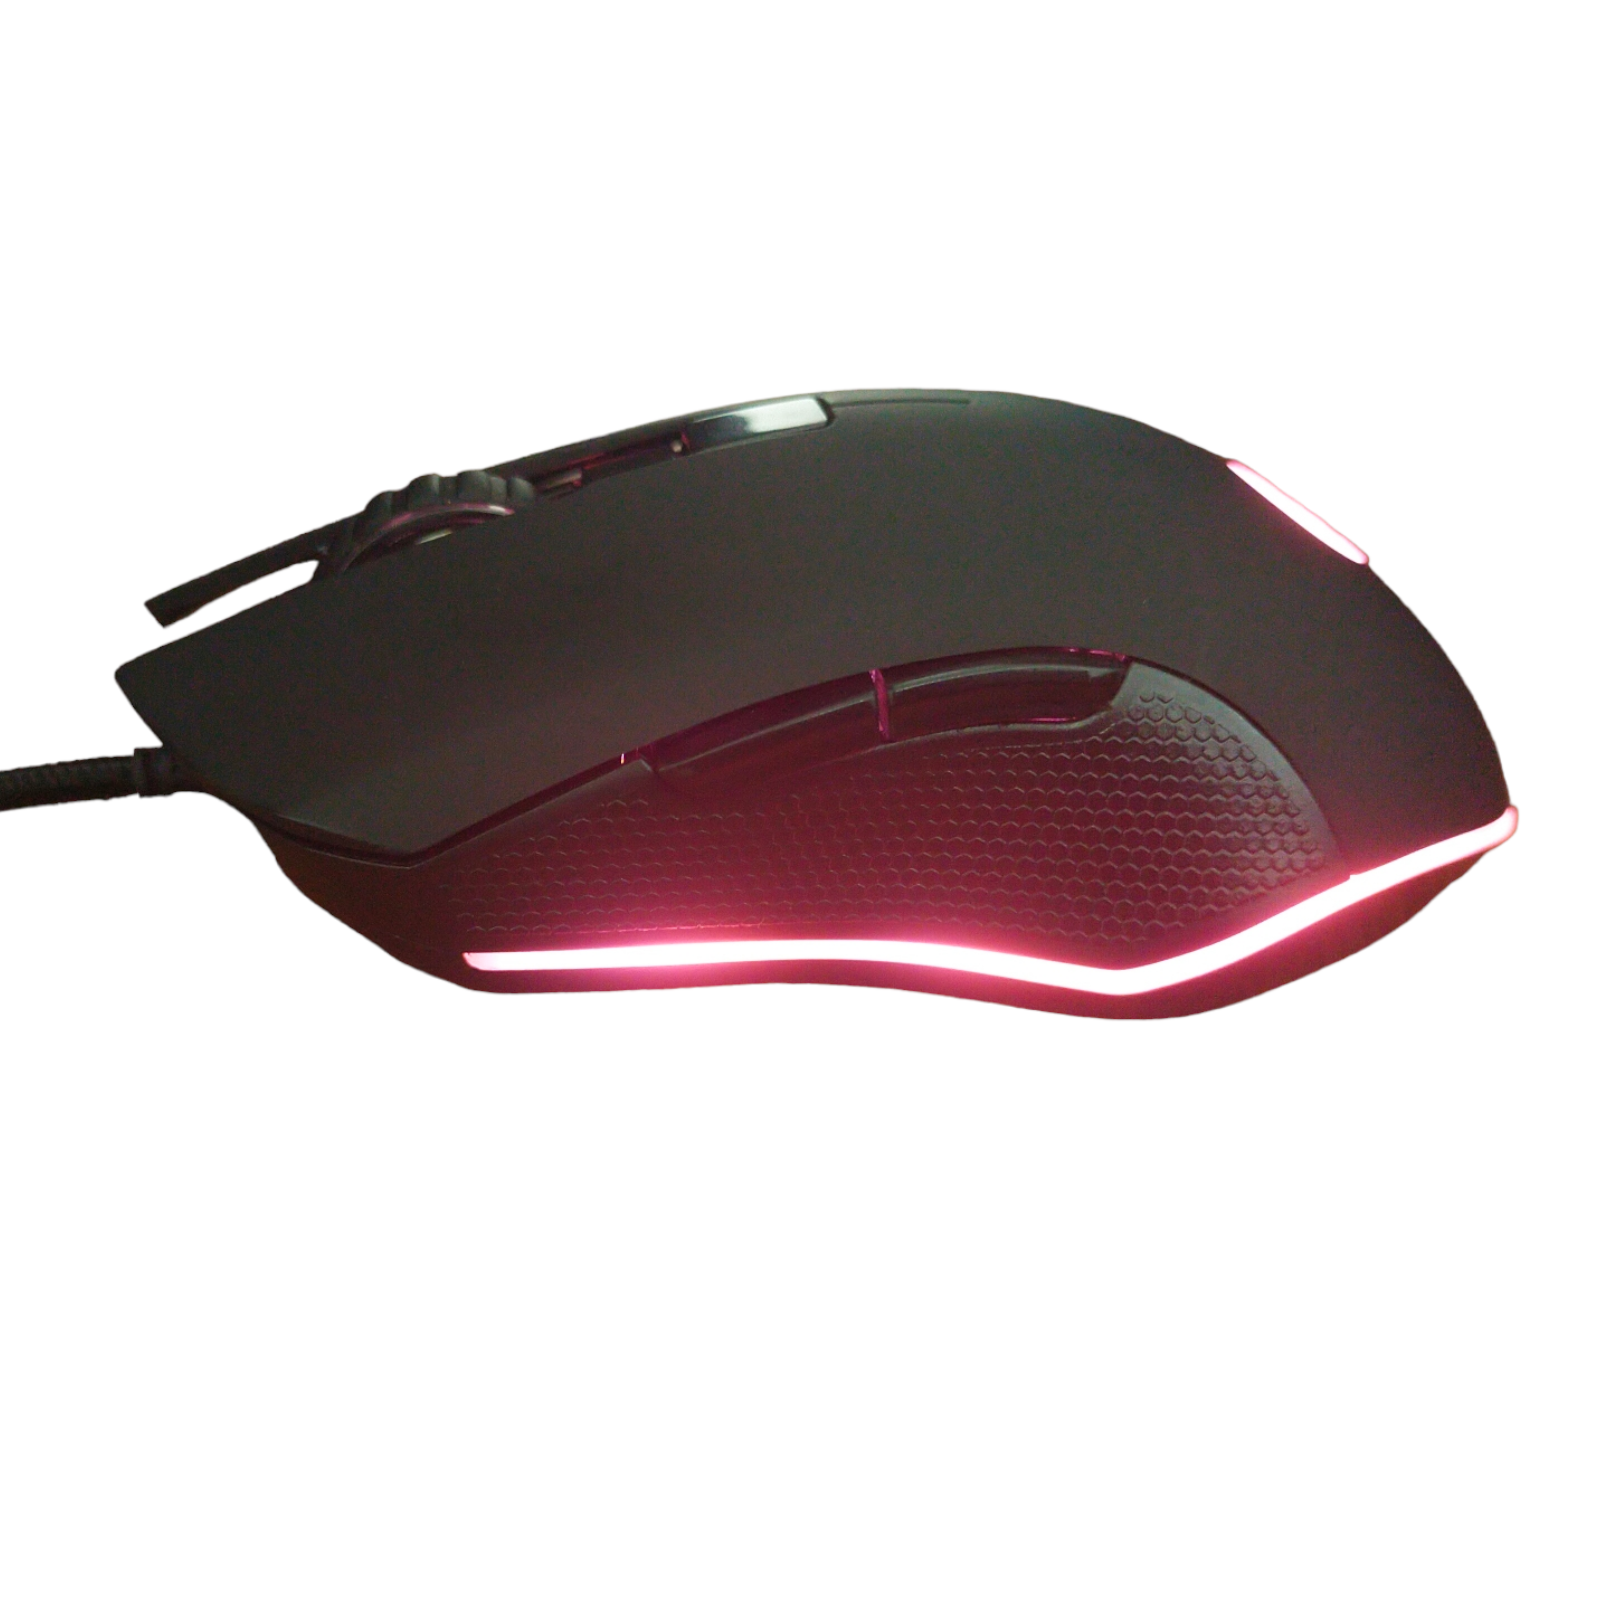 5STAR GMS200 MOUSE